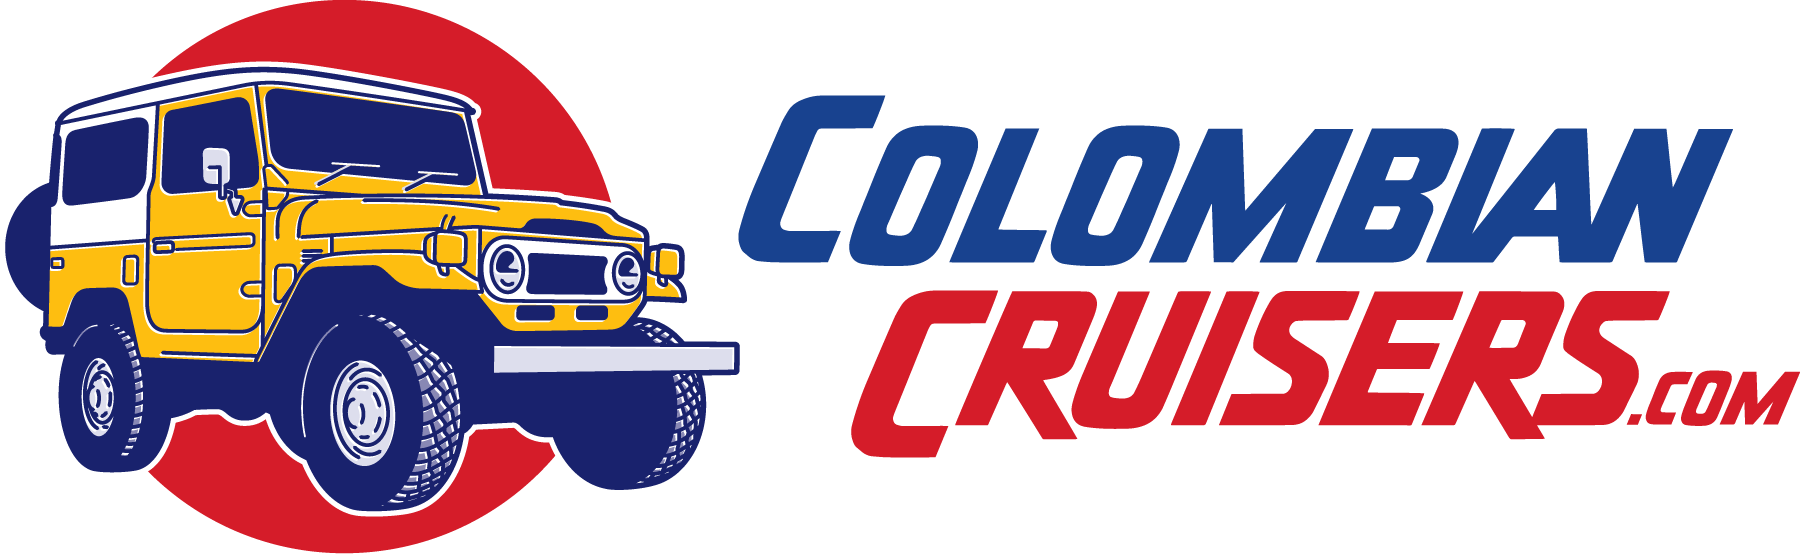 Colombian Cruisers